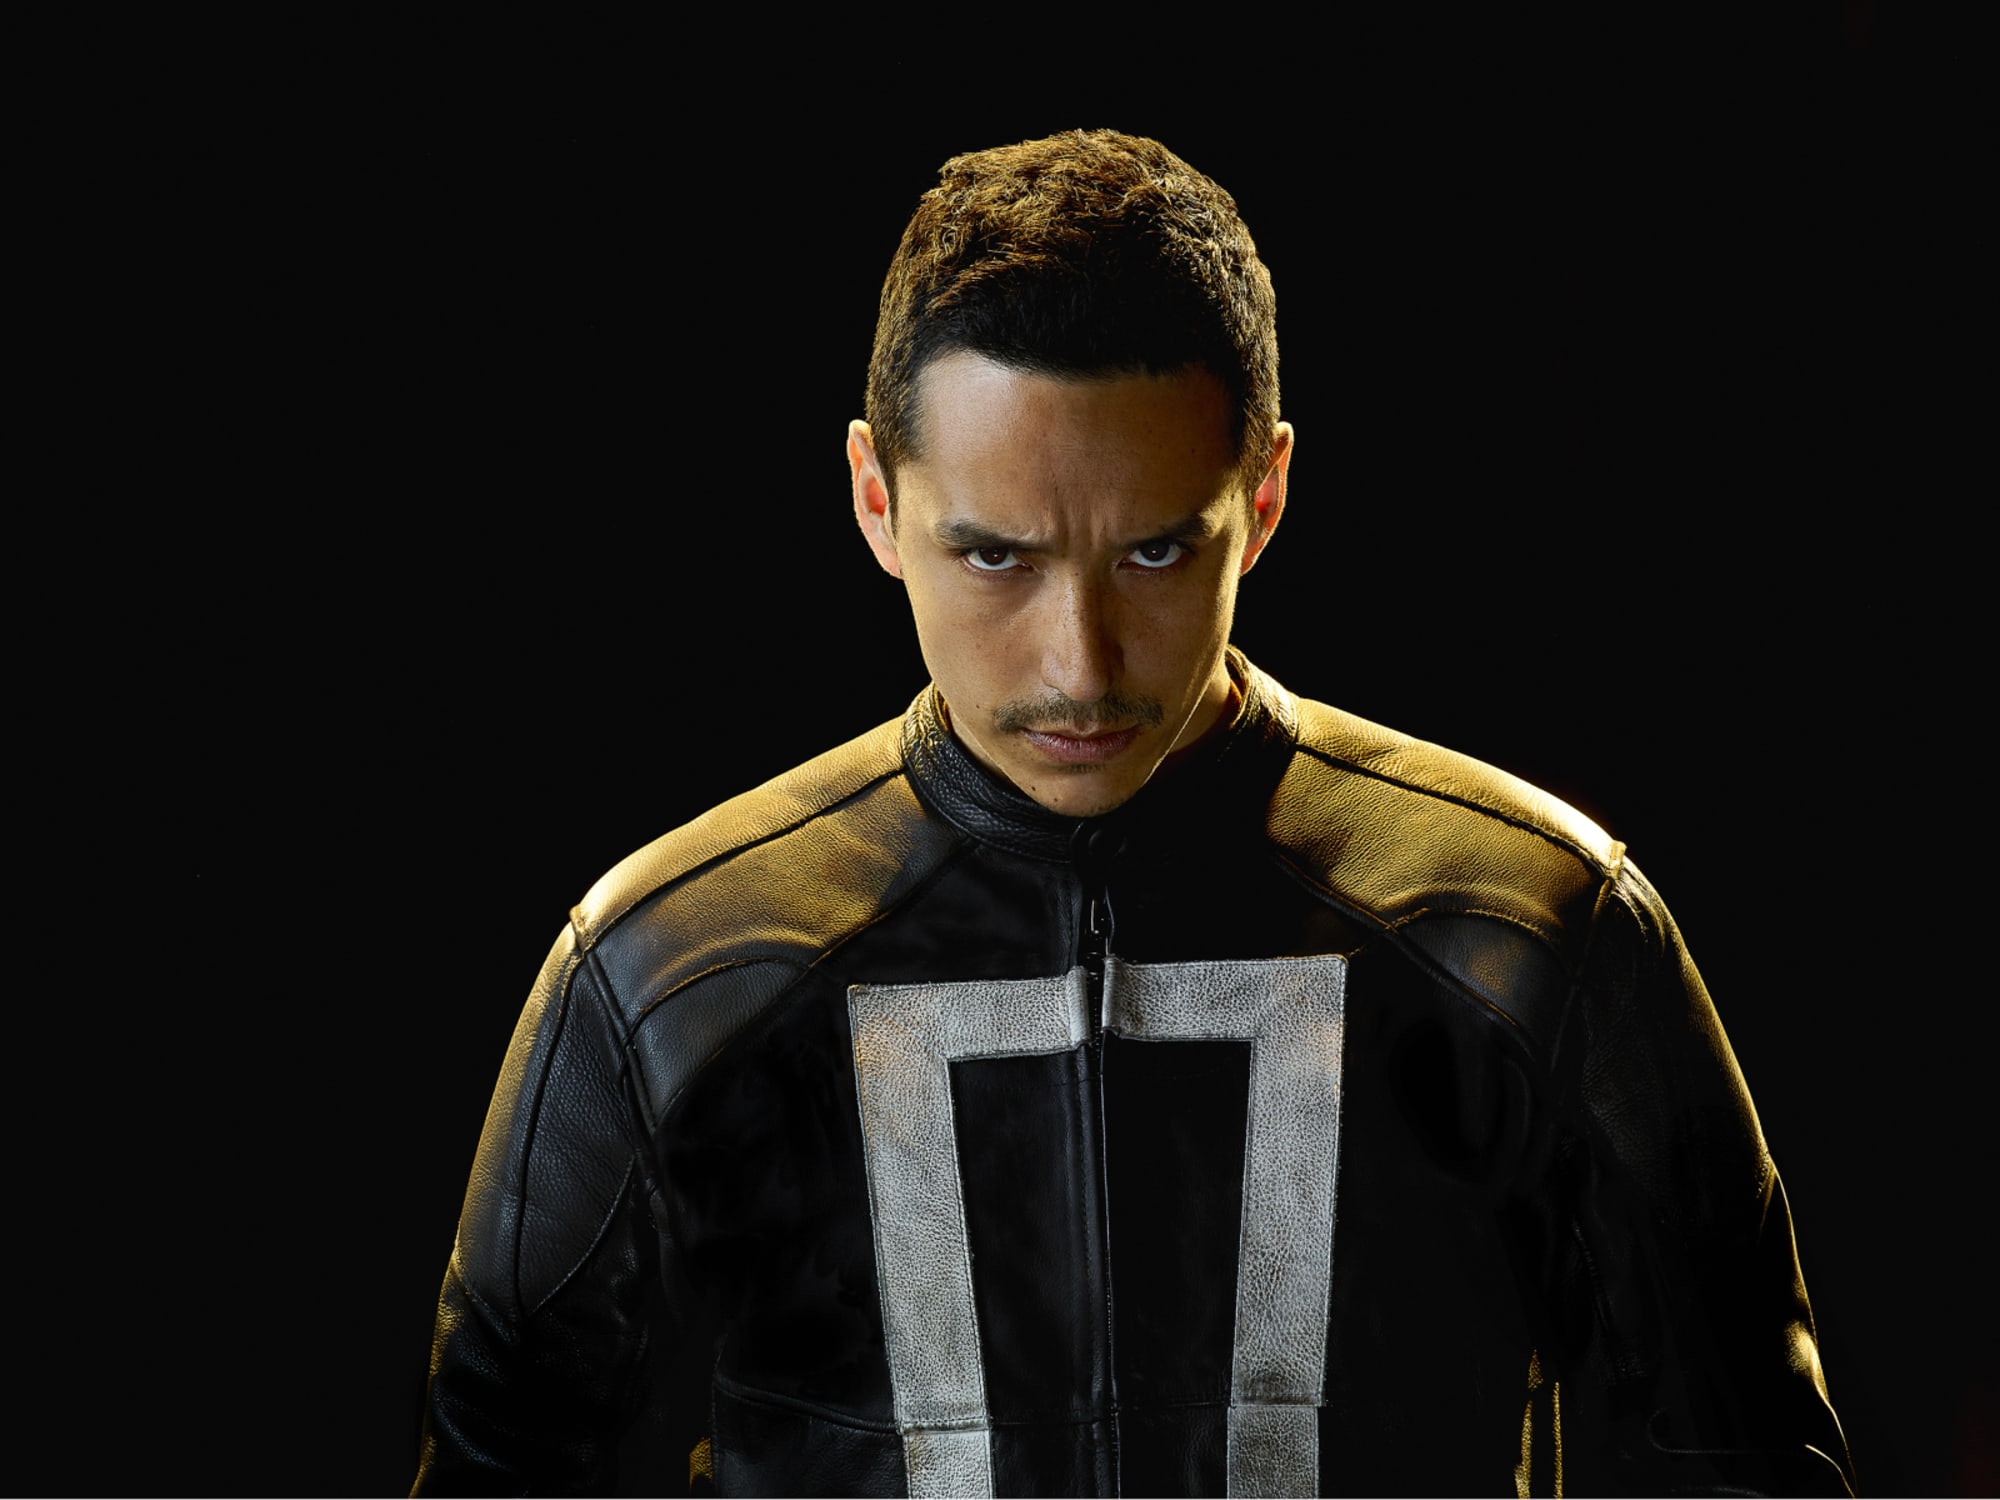 The Last of Us series casts Gabriel Luna as Joel's brother